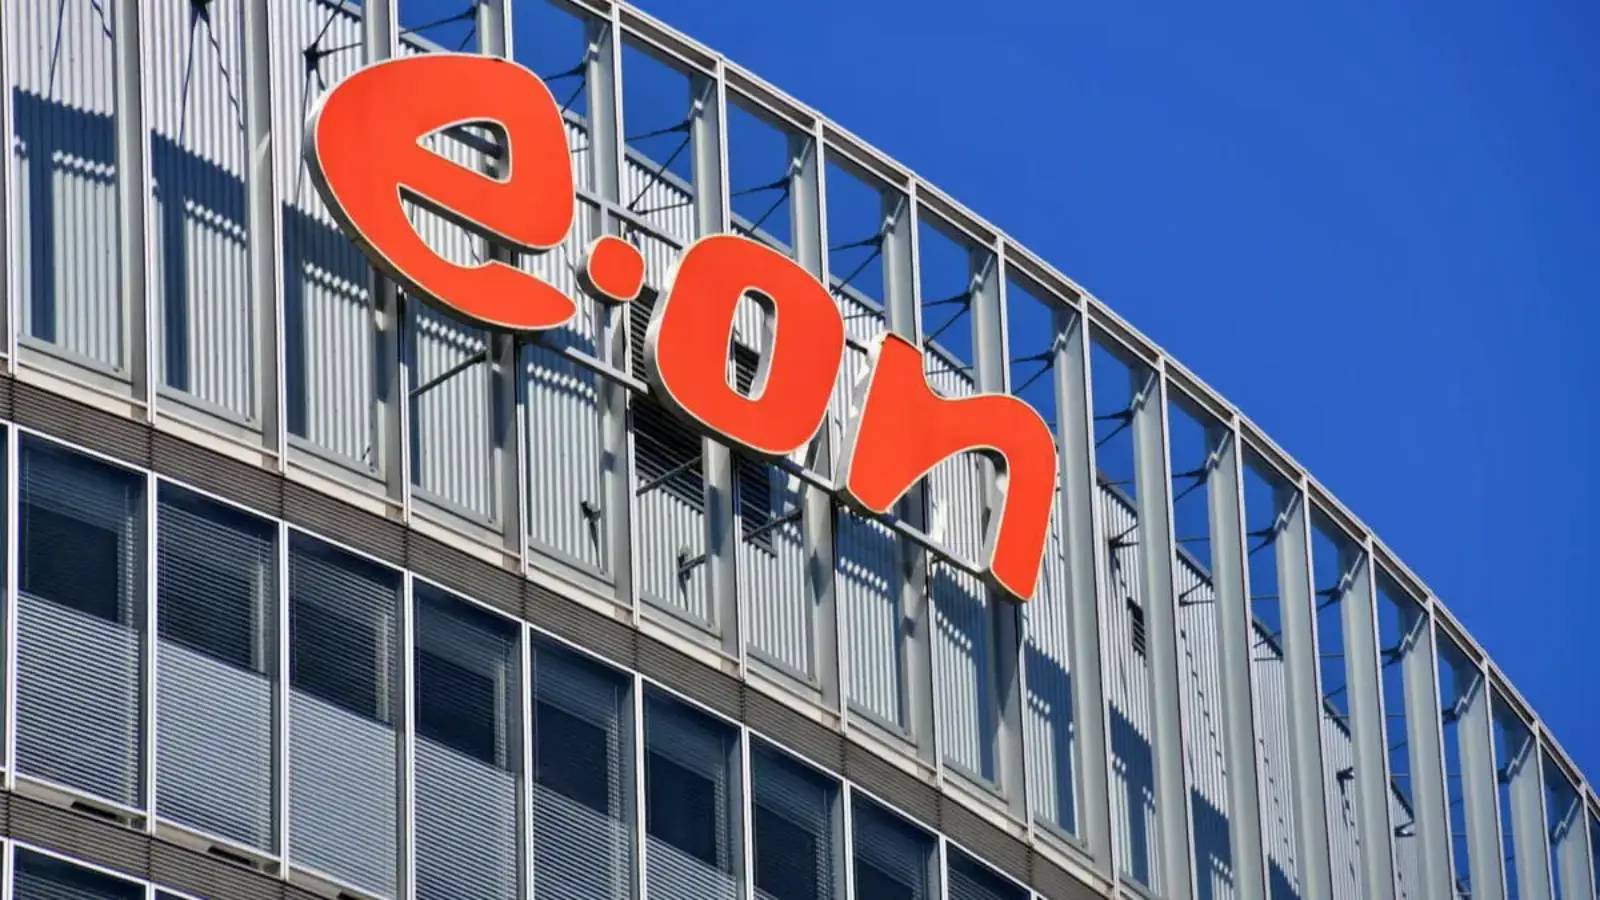 Extremely IMPORTANT E.ON Information Notice to Romanian Customers